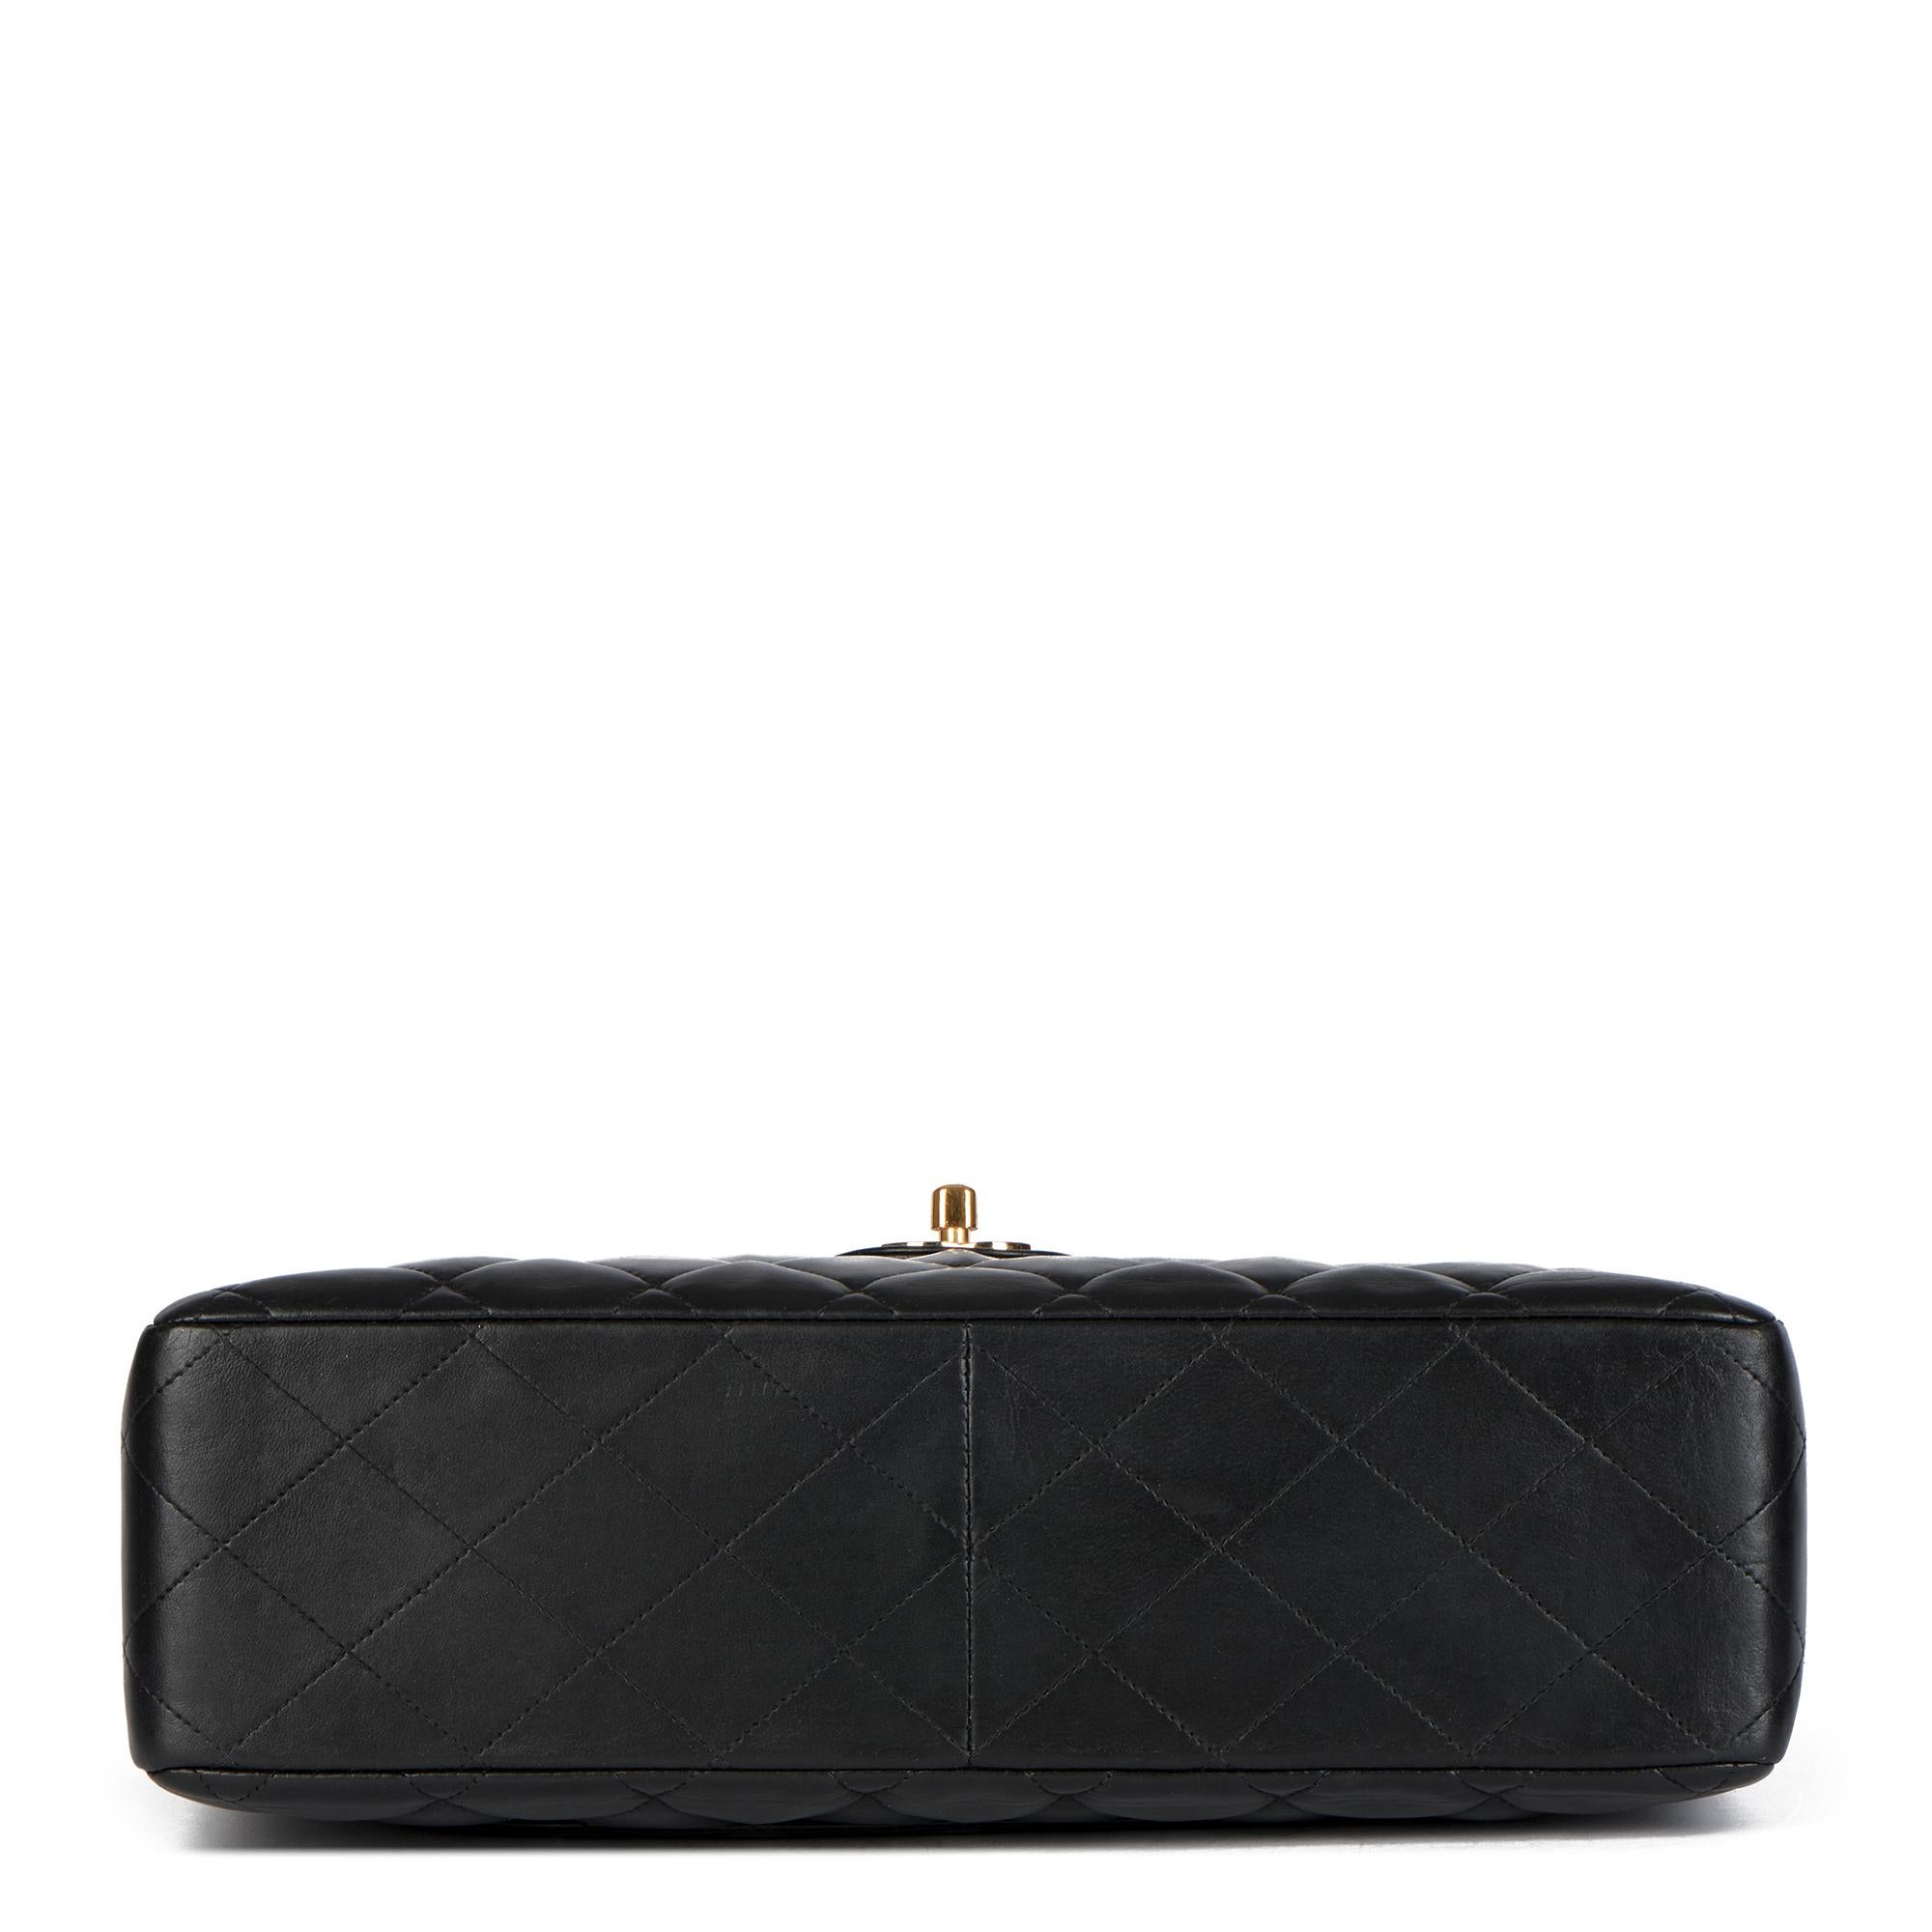 Chanel Black Quilted Lambskin Leather Vintage Jumbo Classic Single Flap Bag 2